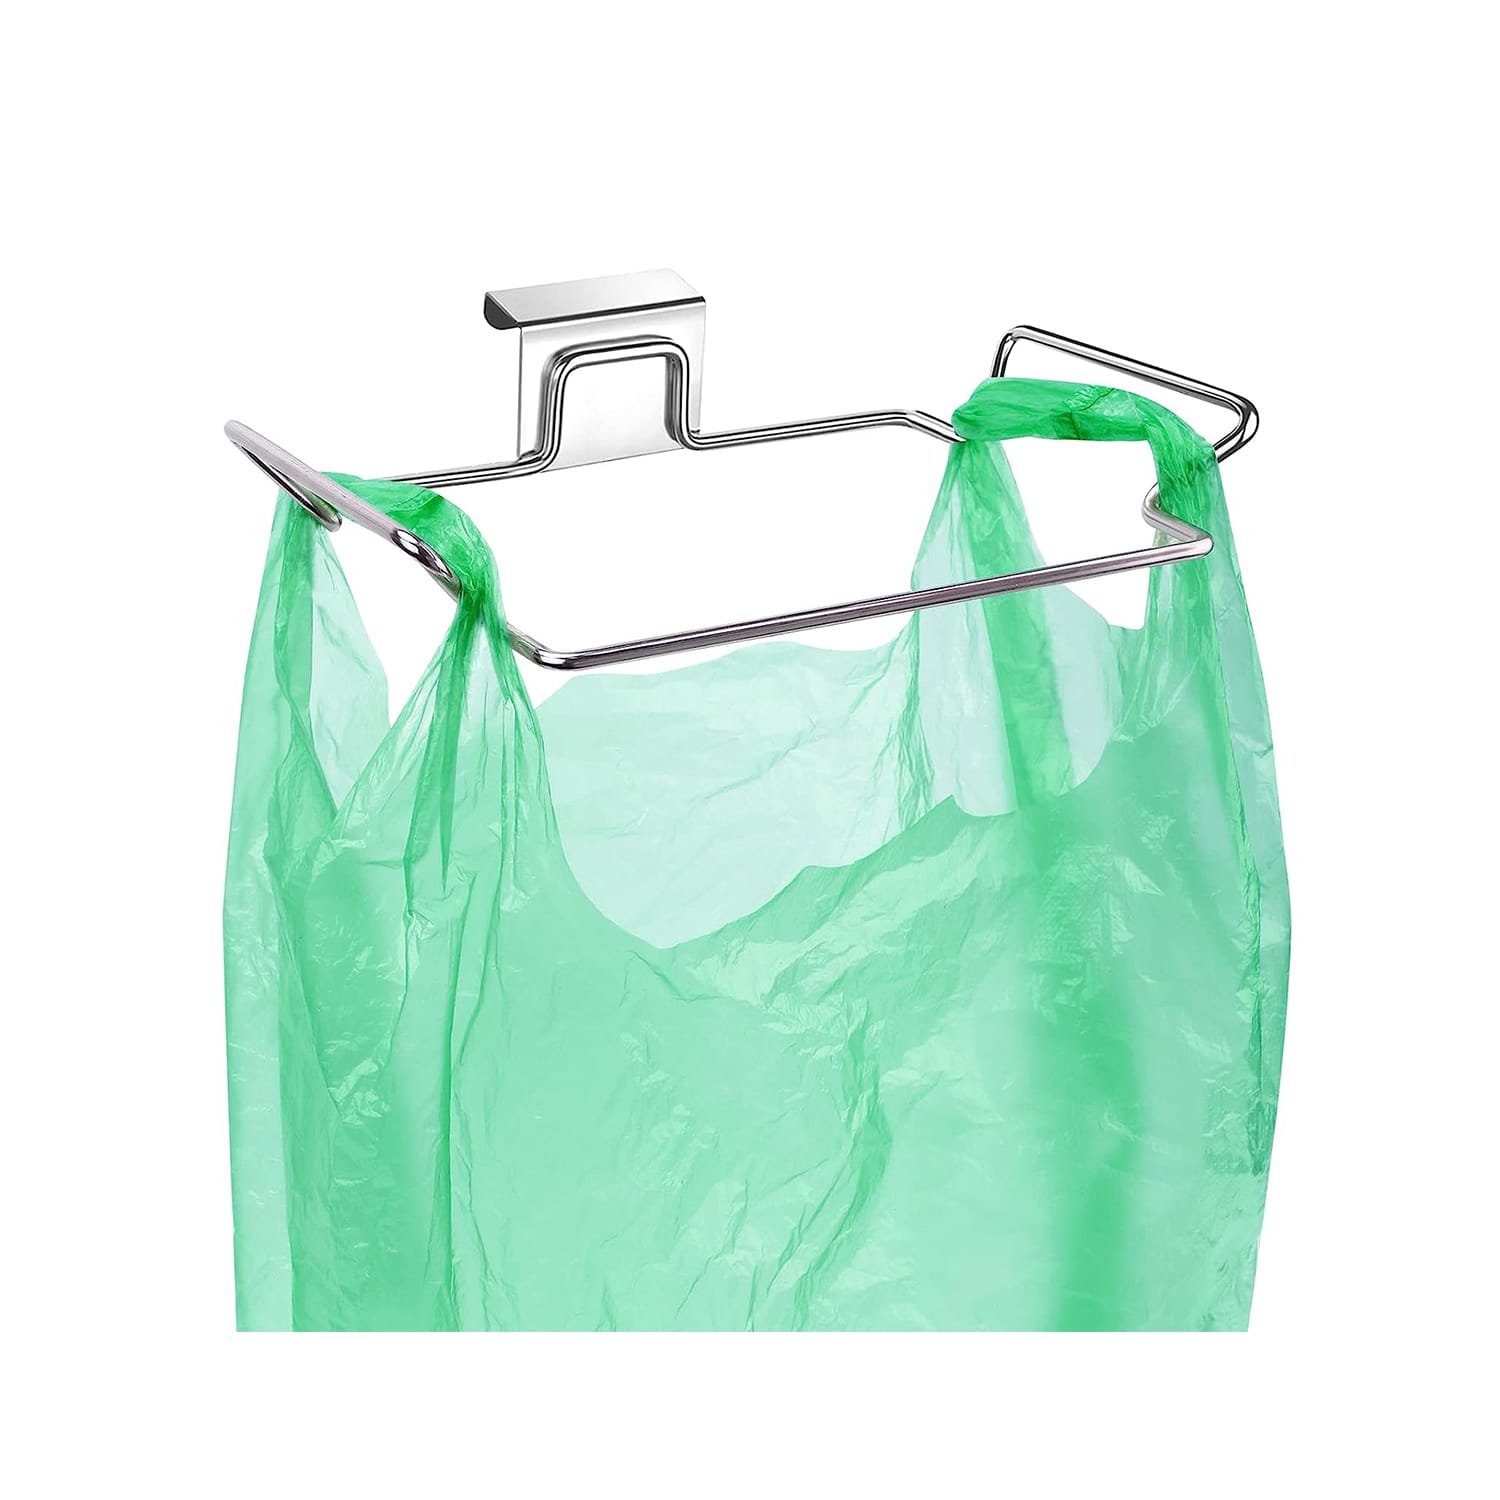 http://cdn.apartmenttherapy.info/image/upload/v1695660428/commerce/product-roundups/2023/2023-09-hanging-trash-cans/oysir-large-stainless-steel-trash-bag-holder.jpg